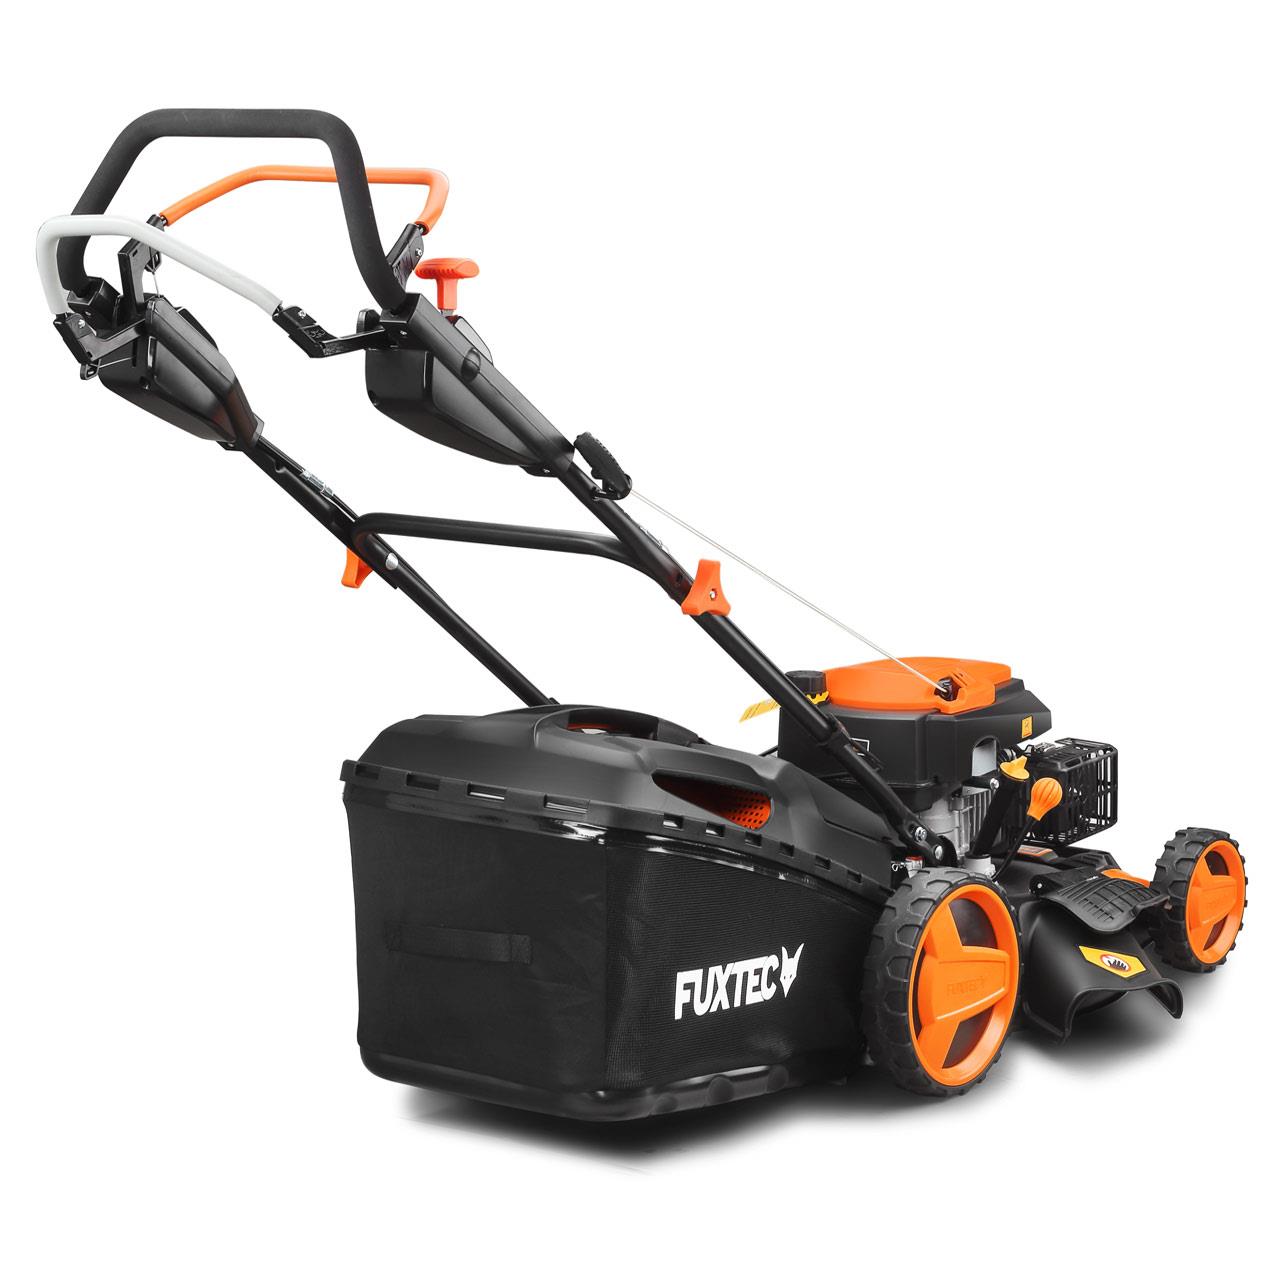 FUXTEC petrol 196cc self-propelled lawnmower 6HP - 501mm cutting width 4in1 mulching, side-discharge, 60l grass collector - RM5196PRO